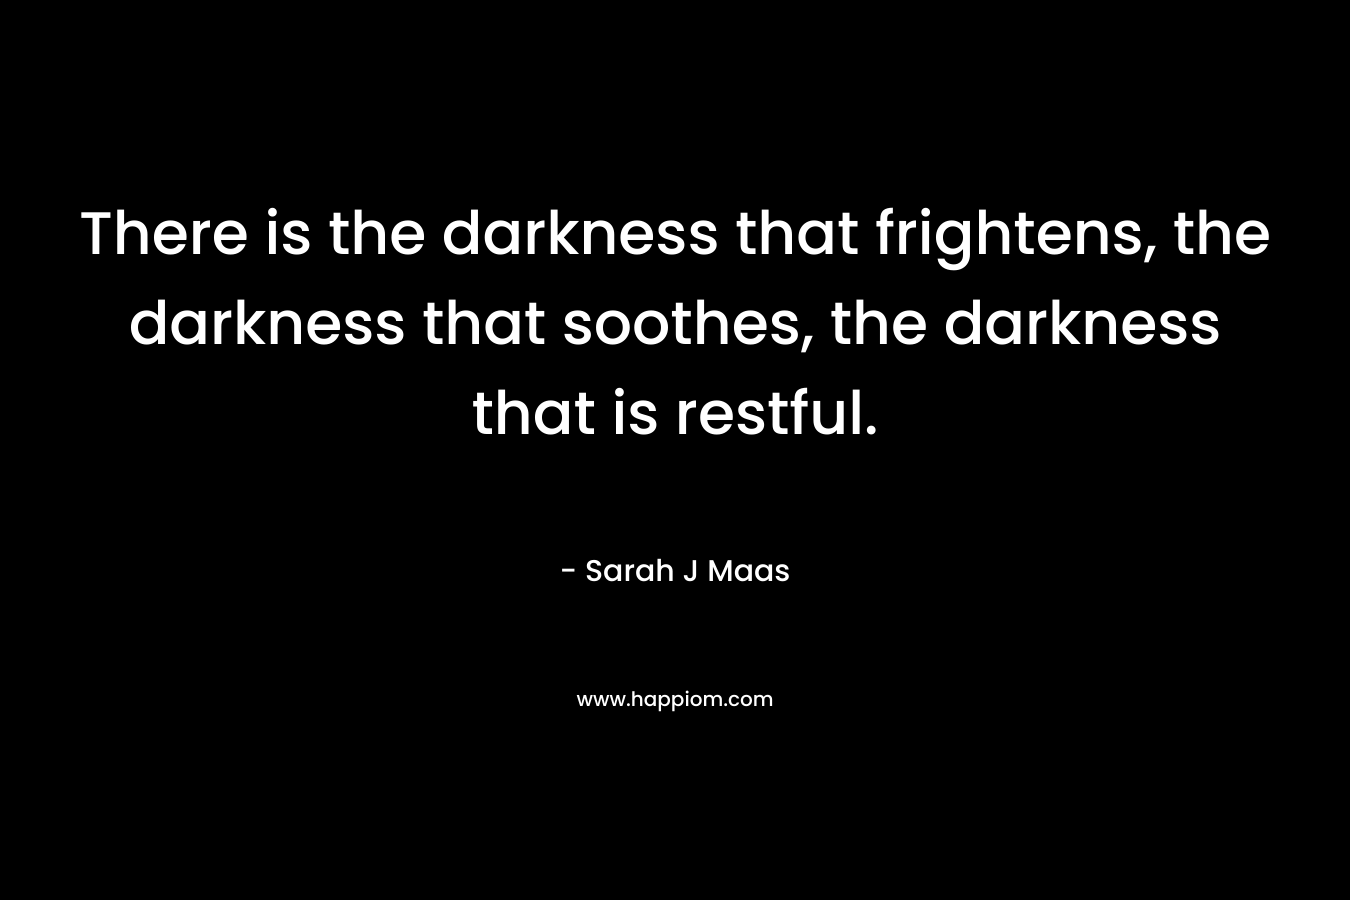 There is the darkness that frightens, the darkness that soothes, the darkness that is restful. – Sarah J Maas